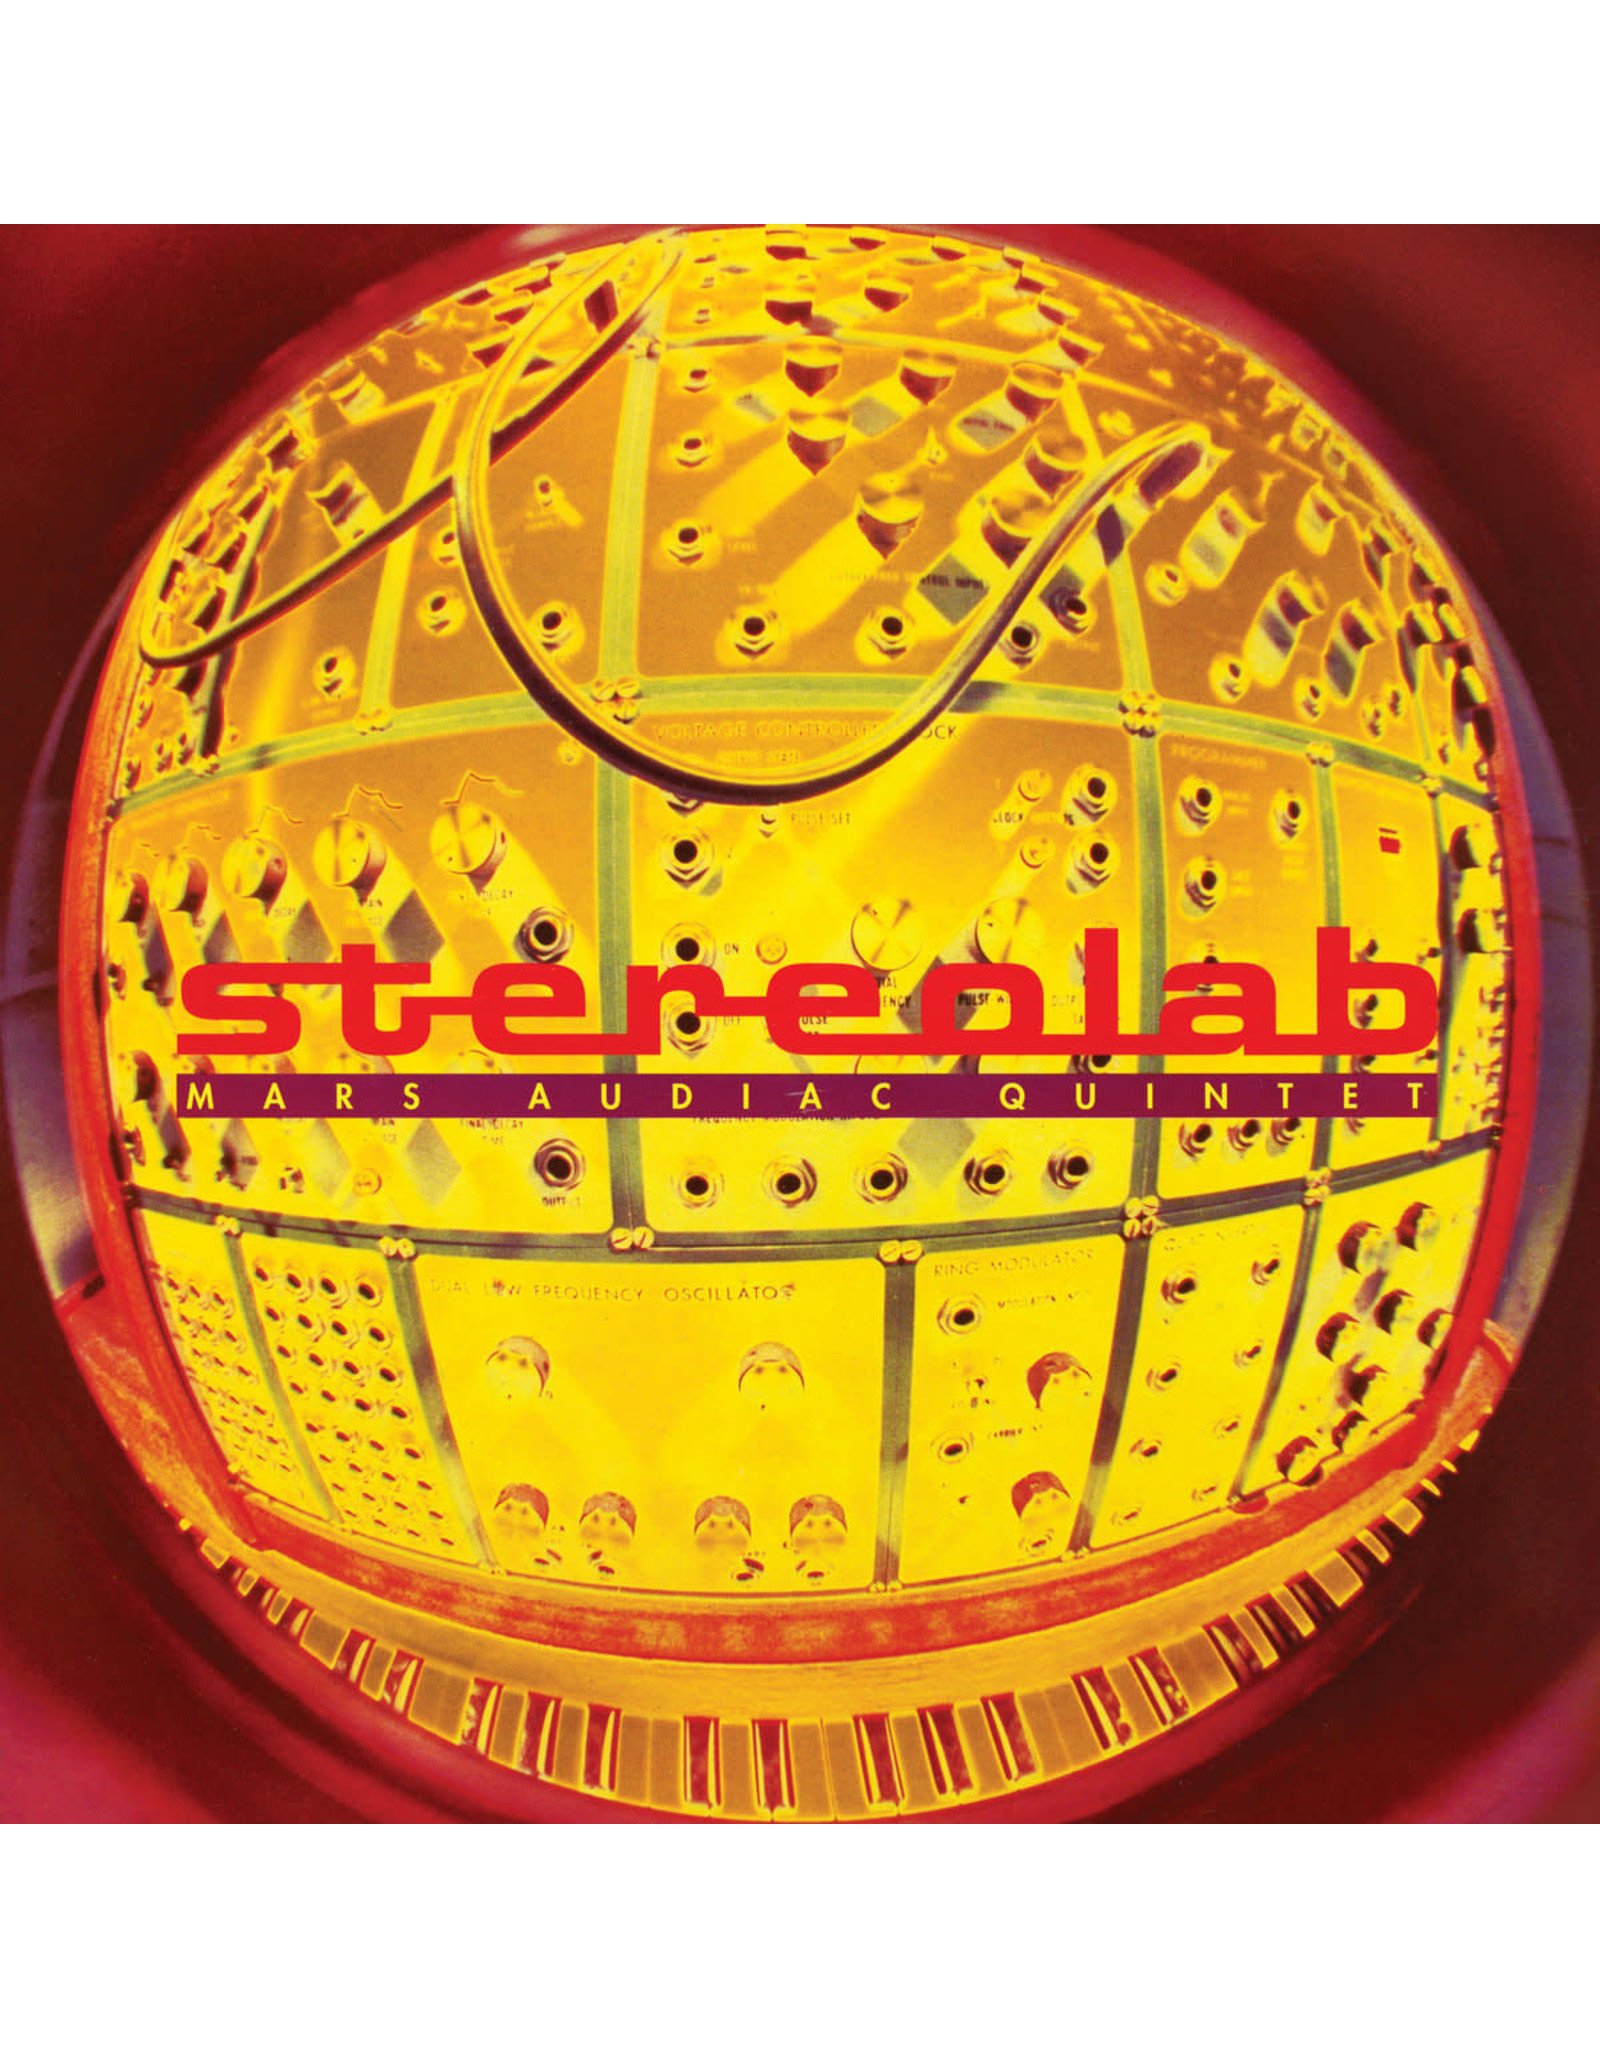 Stereolab - Mass Audiac Quintet (Expanded Edition)